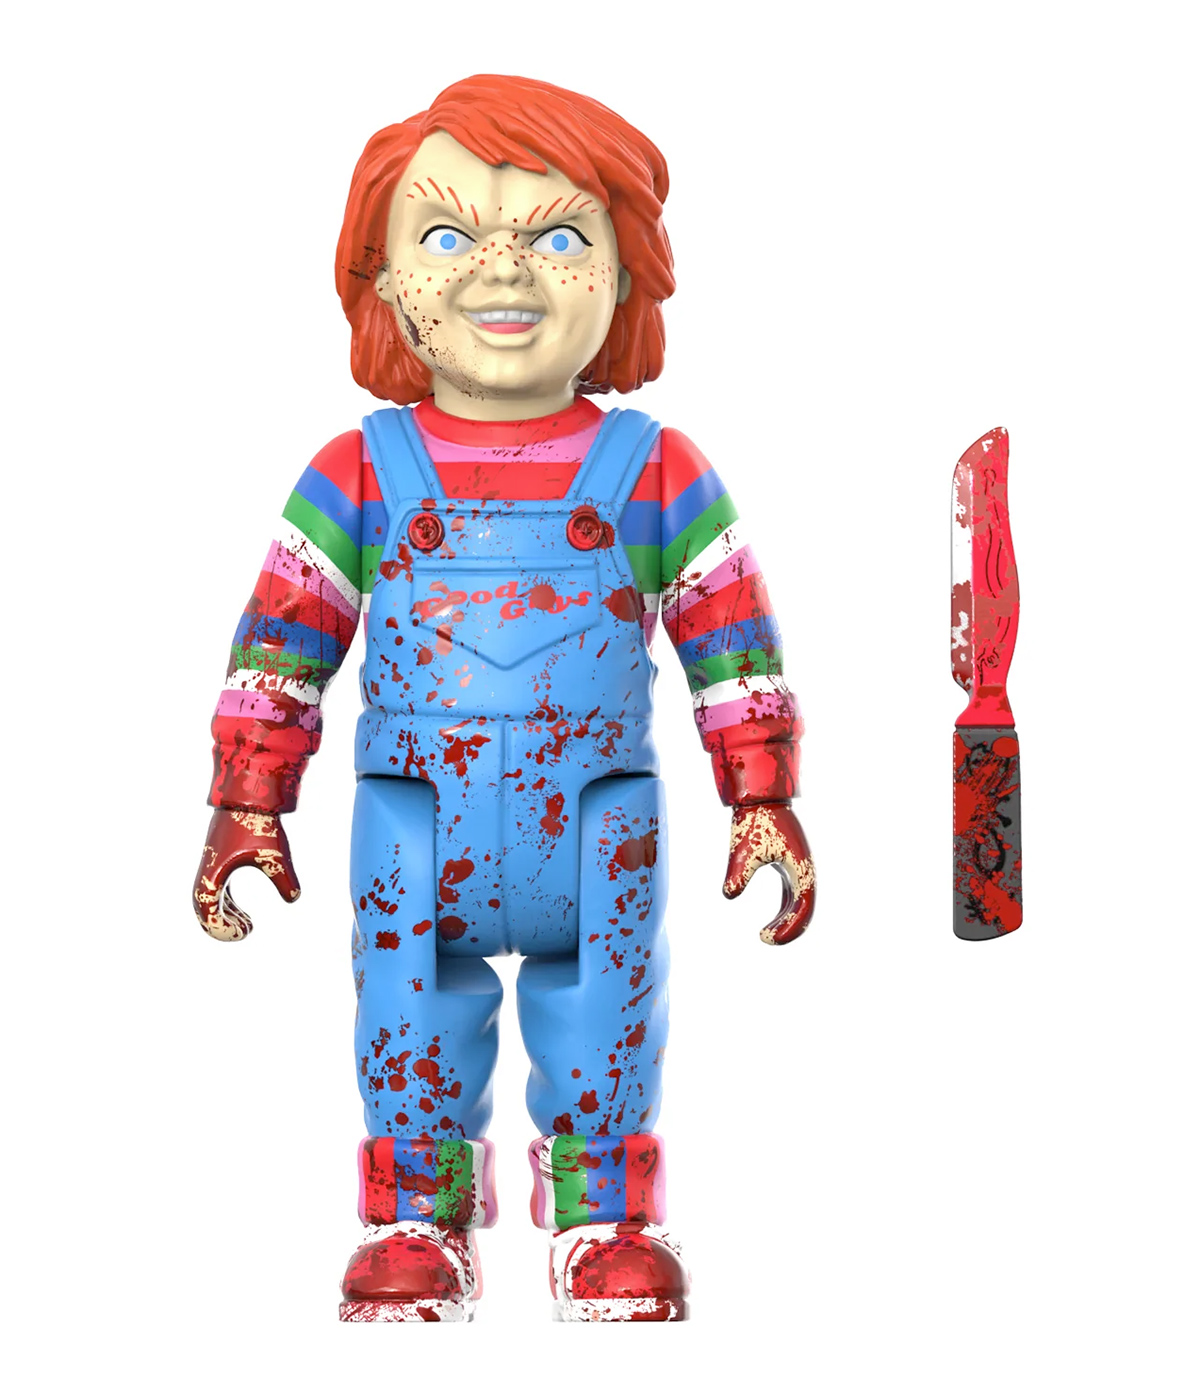 Action Figures ReAction Blood Splatter: Chucky e Pennywise